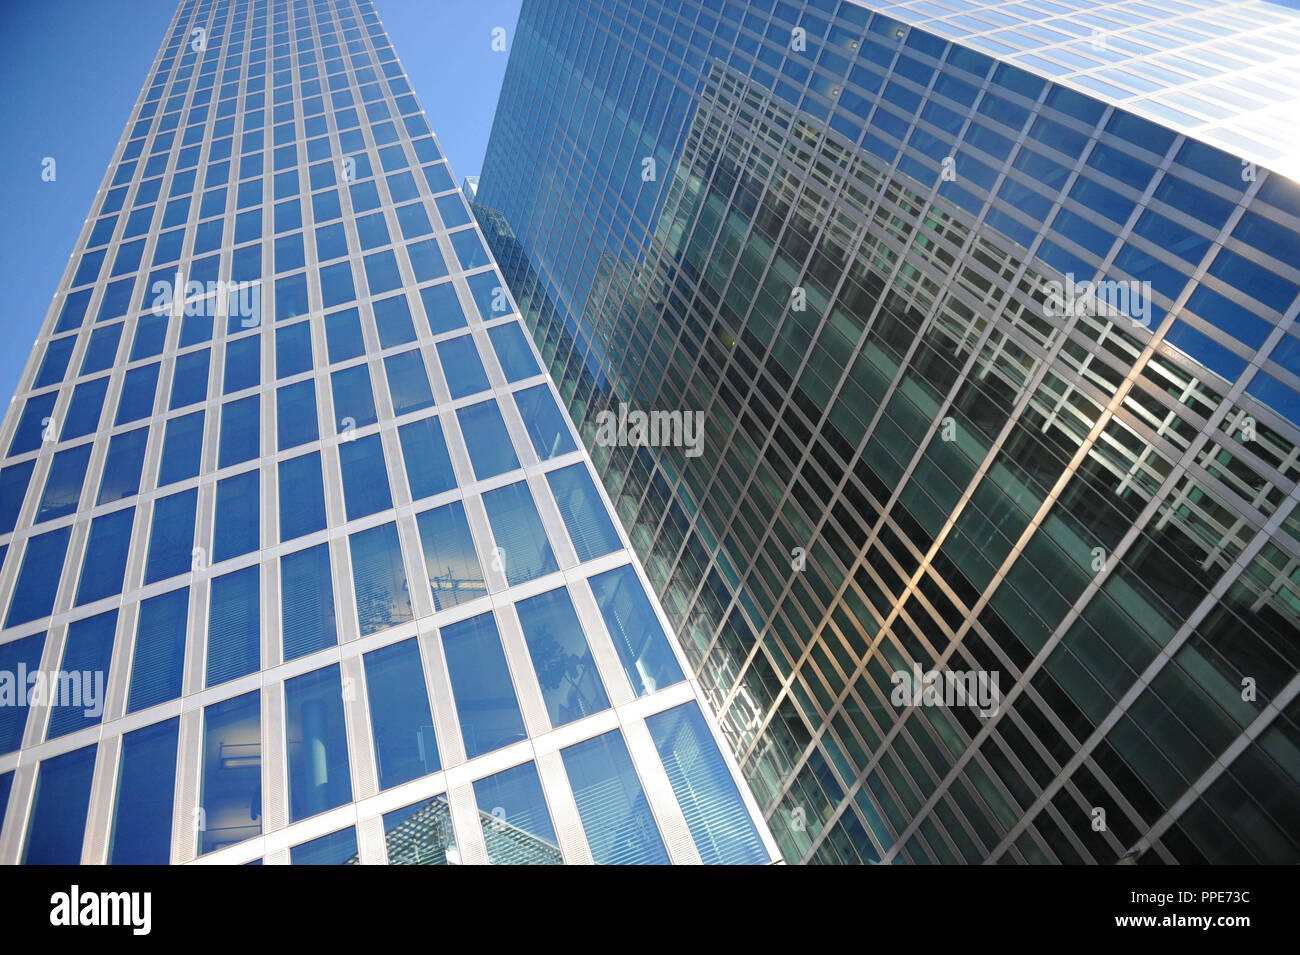 The Highlight Towers in Munich Schwabing. Stock Photo